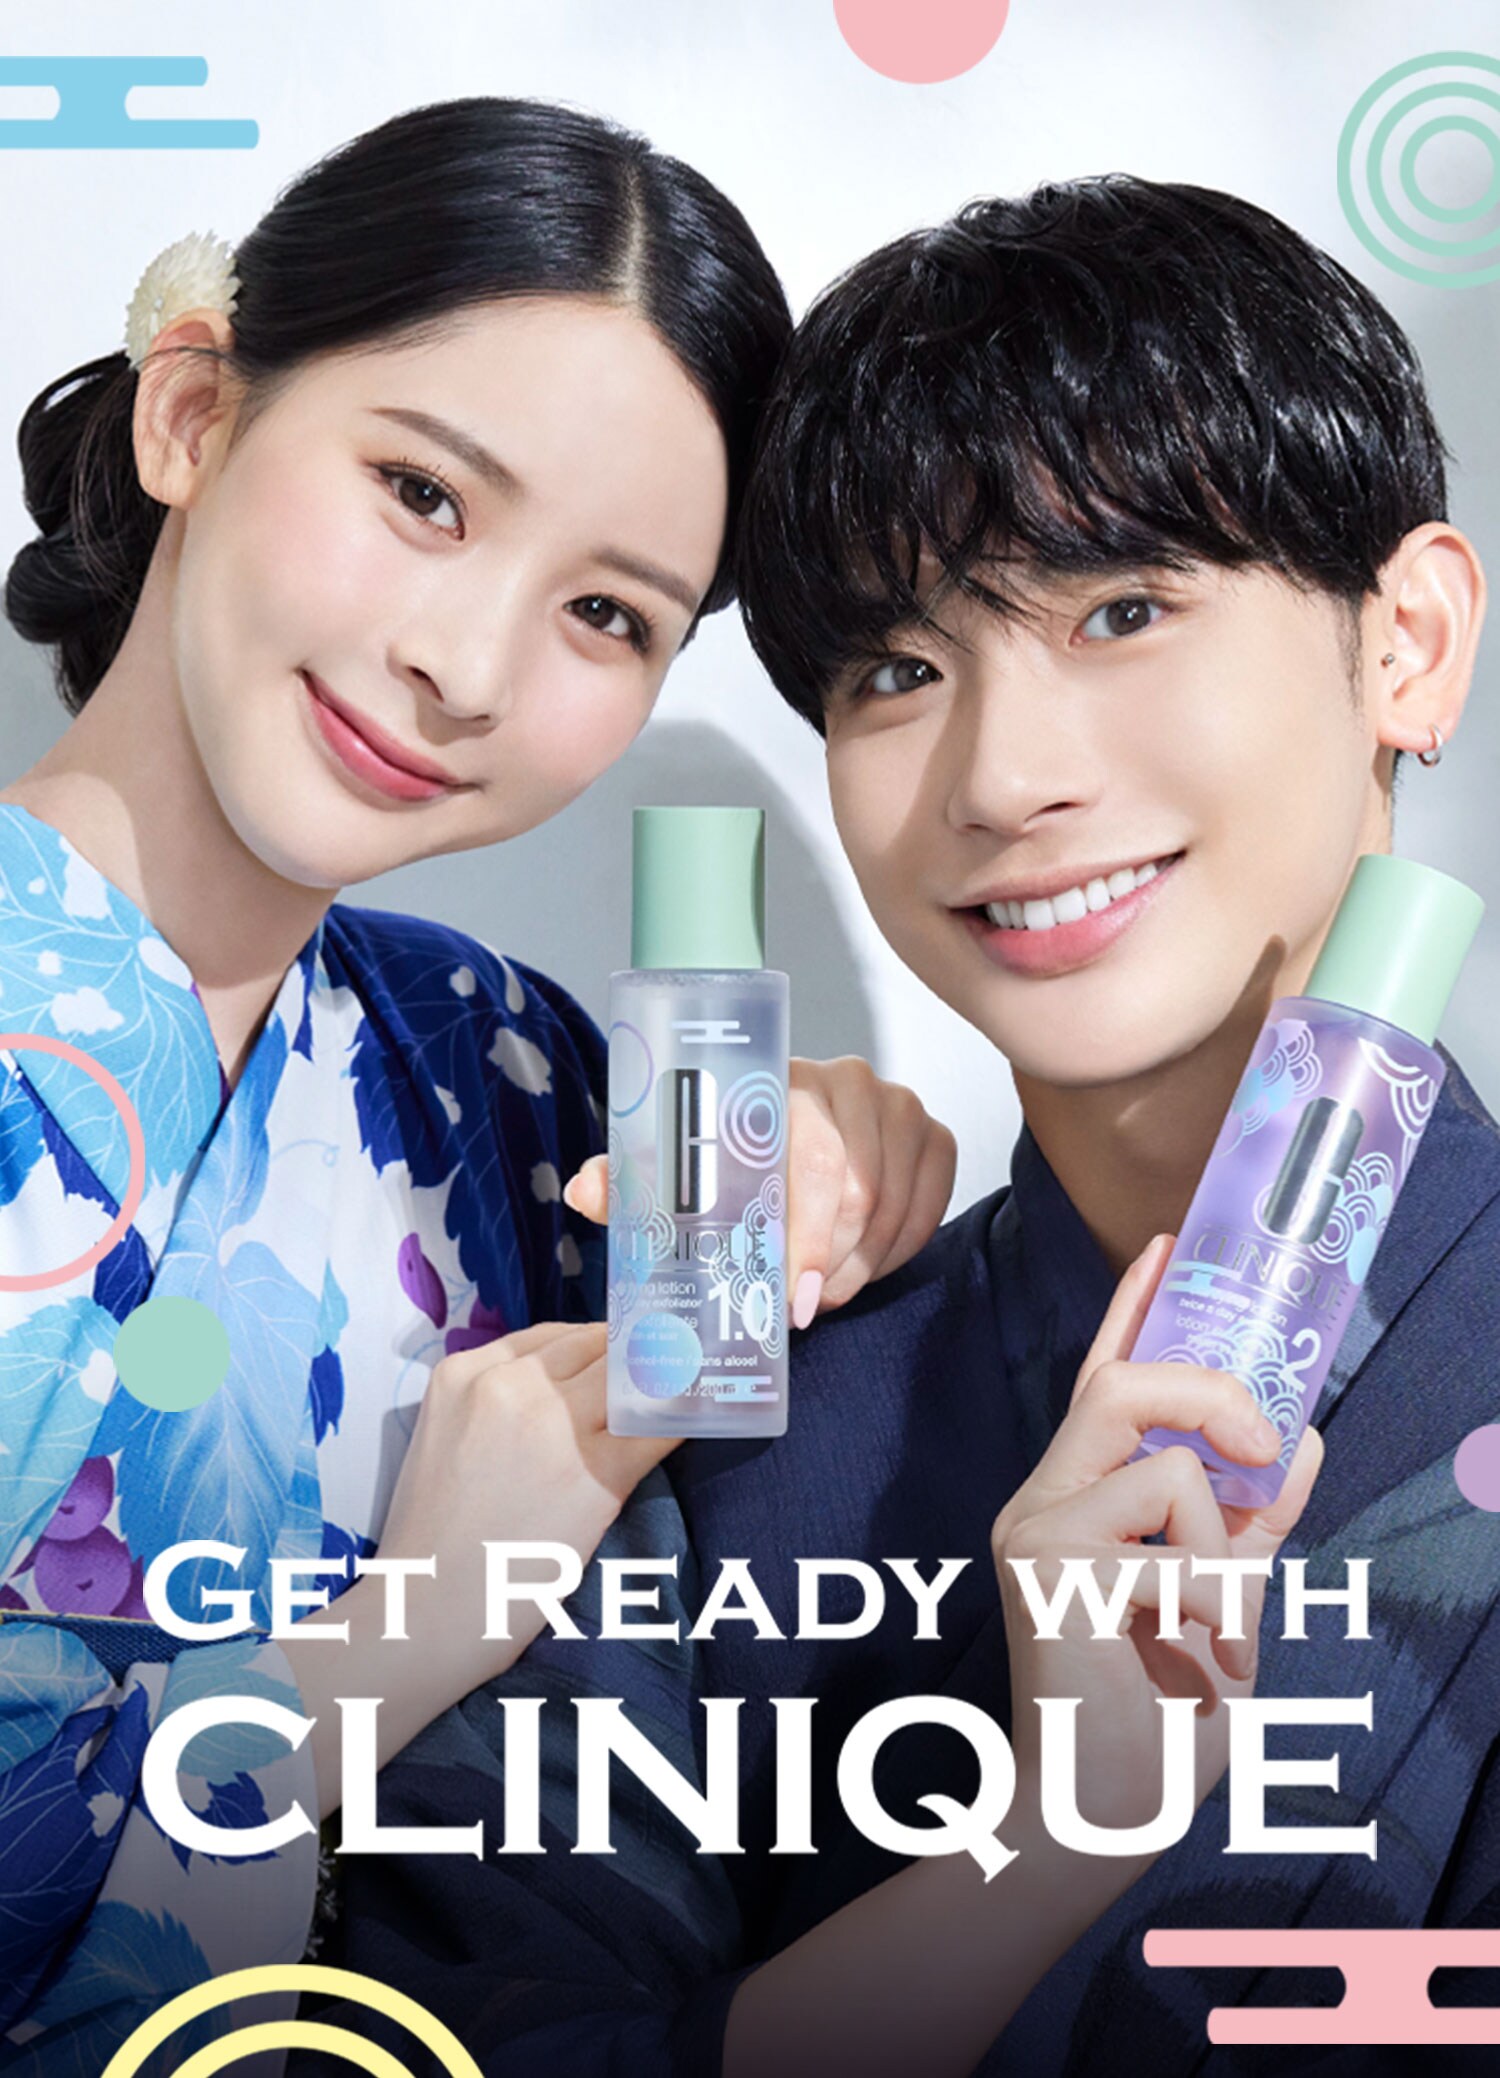 GET READY WITH CLINIQUE